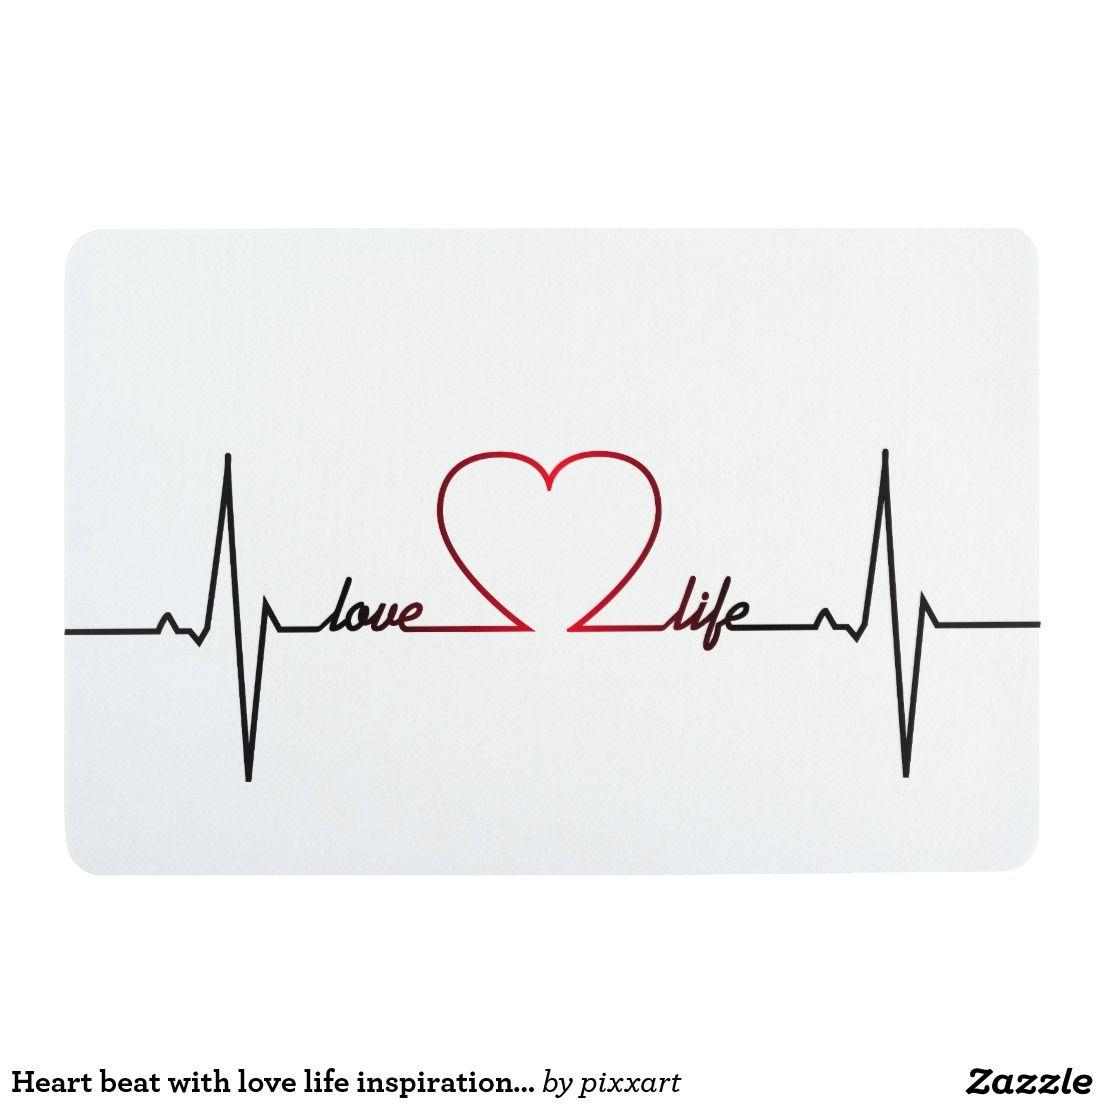 Heart beat with love life inspirational quote floor mat